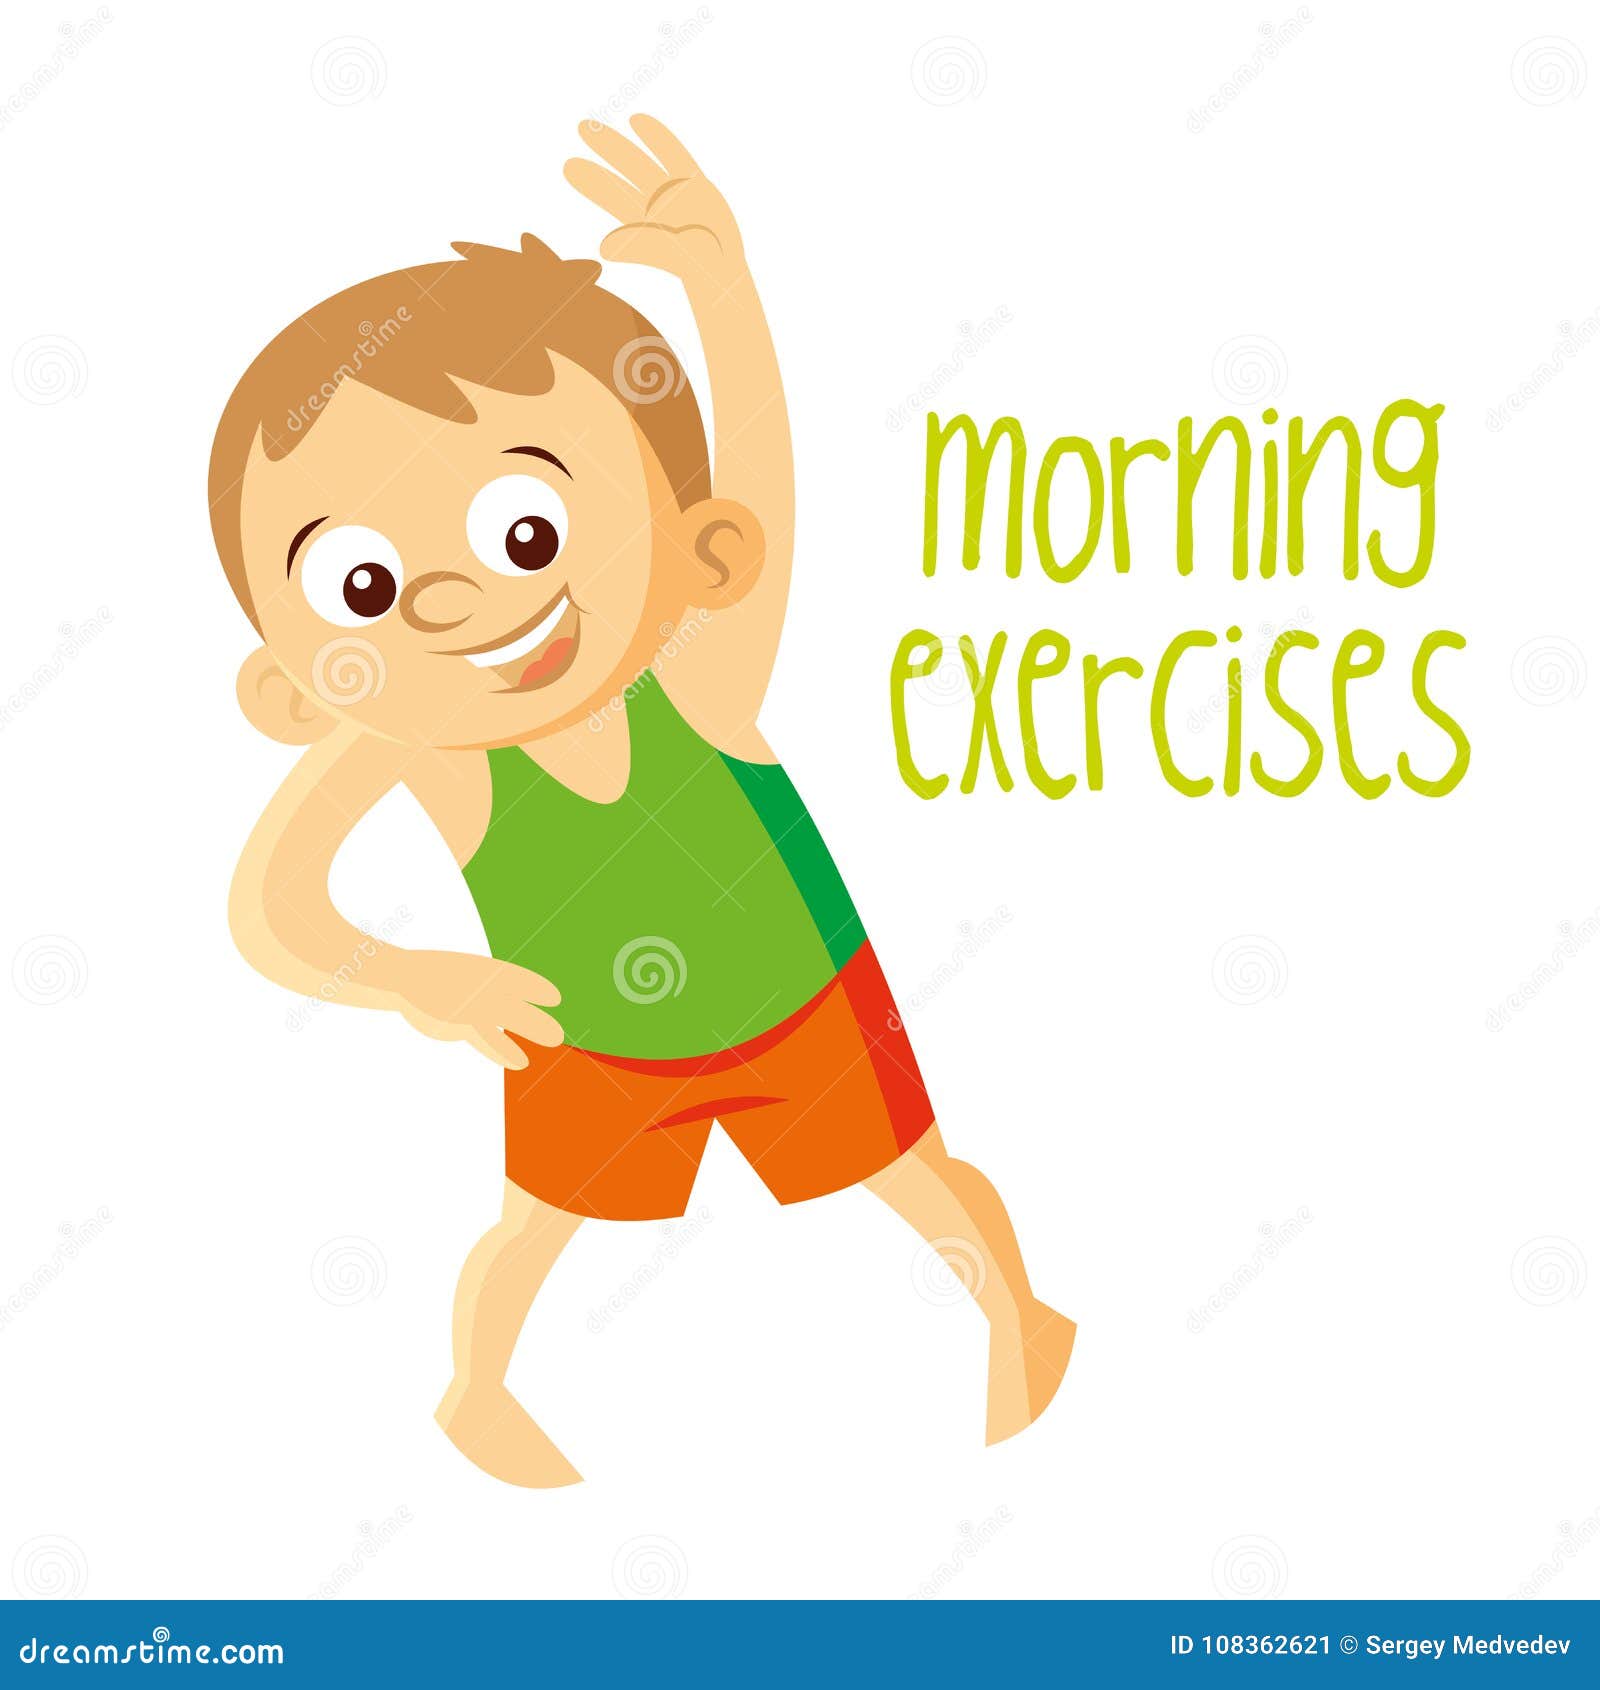 I to be morning exercises. Картинки morning exercises. Do morning exercises картинка. Morning exercises for children. Morning exercises for Kids.